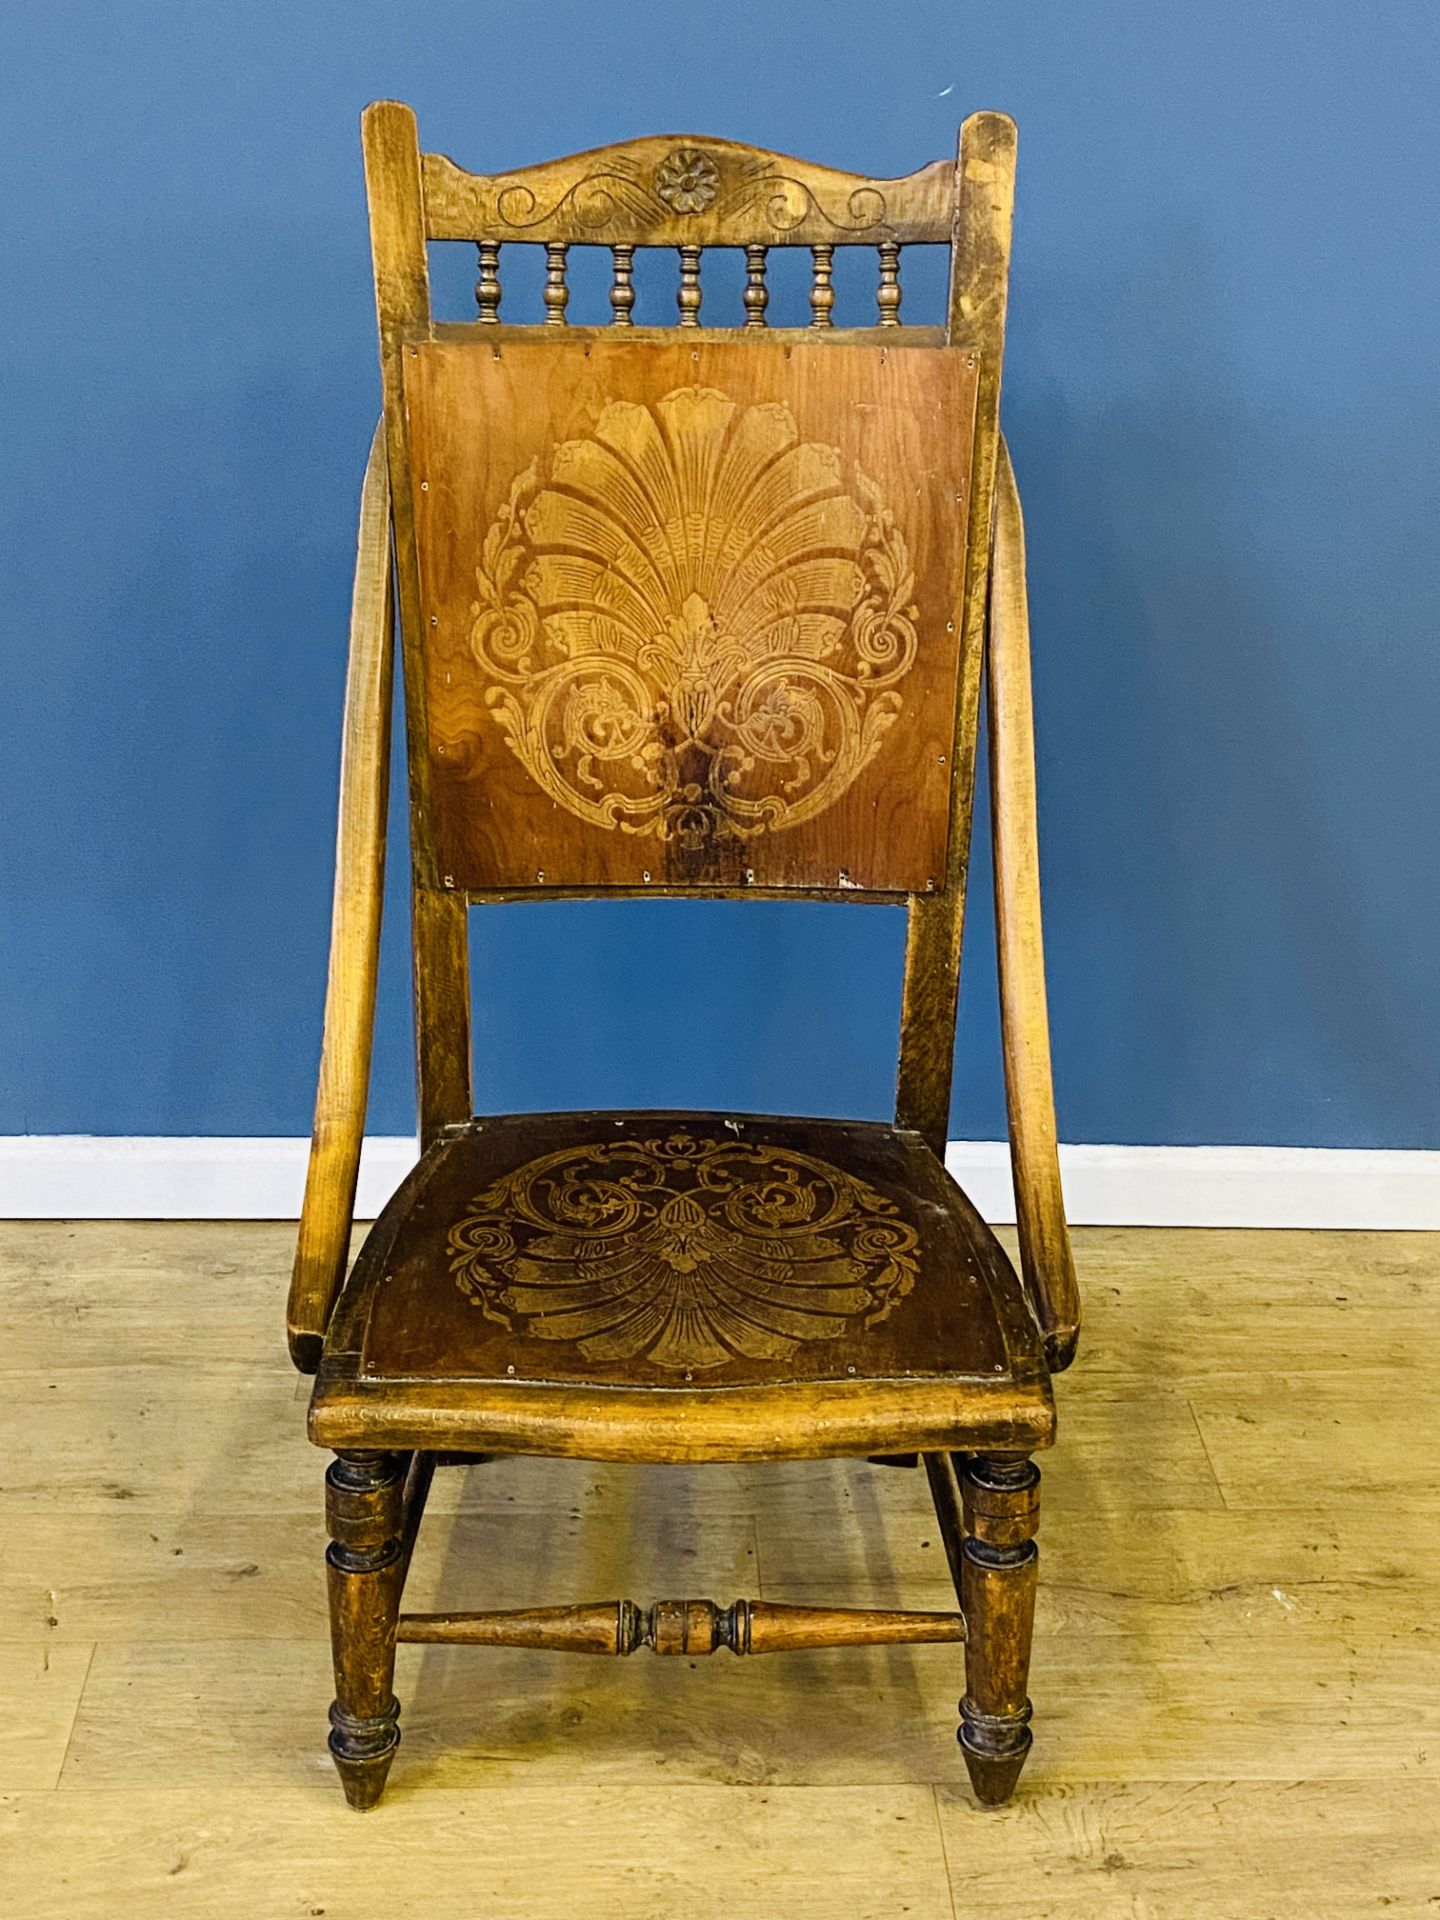 Mahogany chair with plywood seat and back